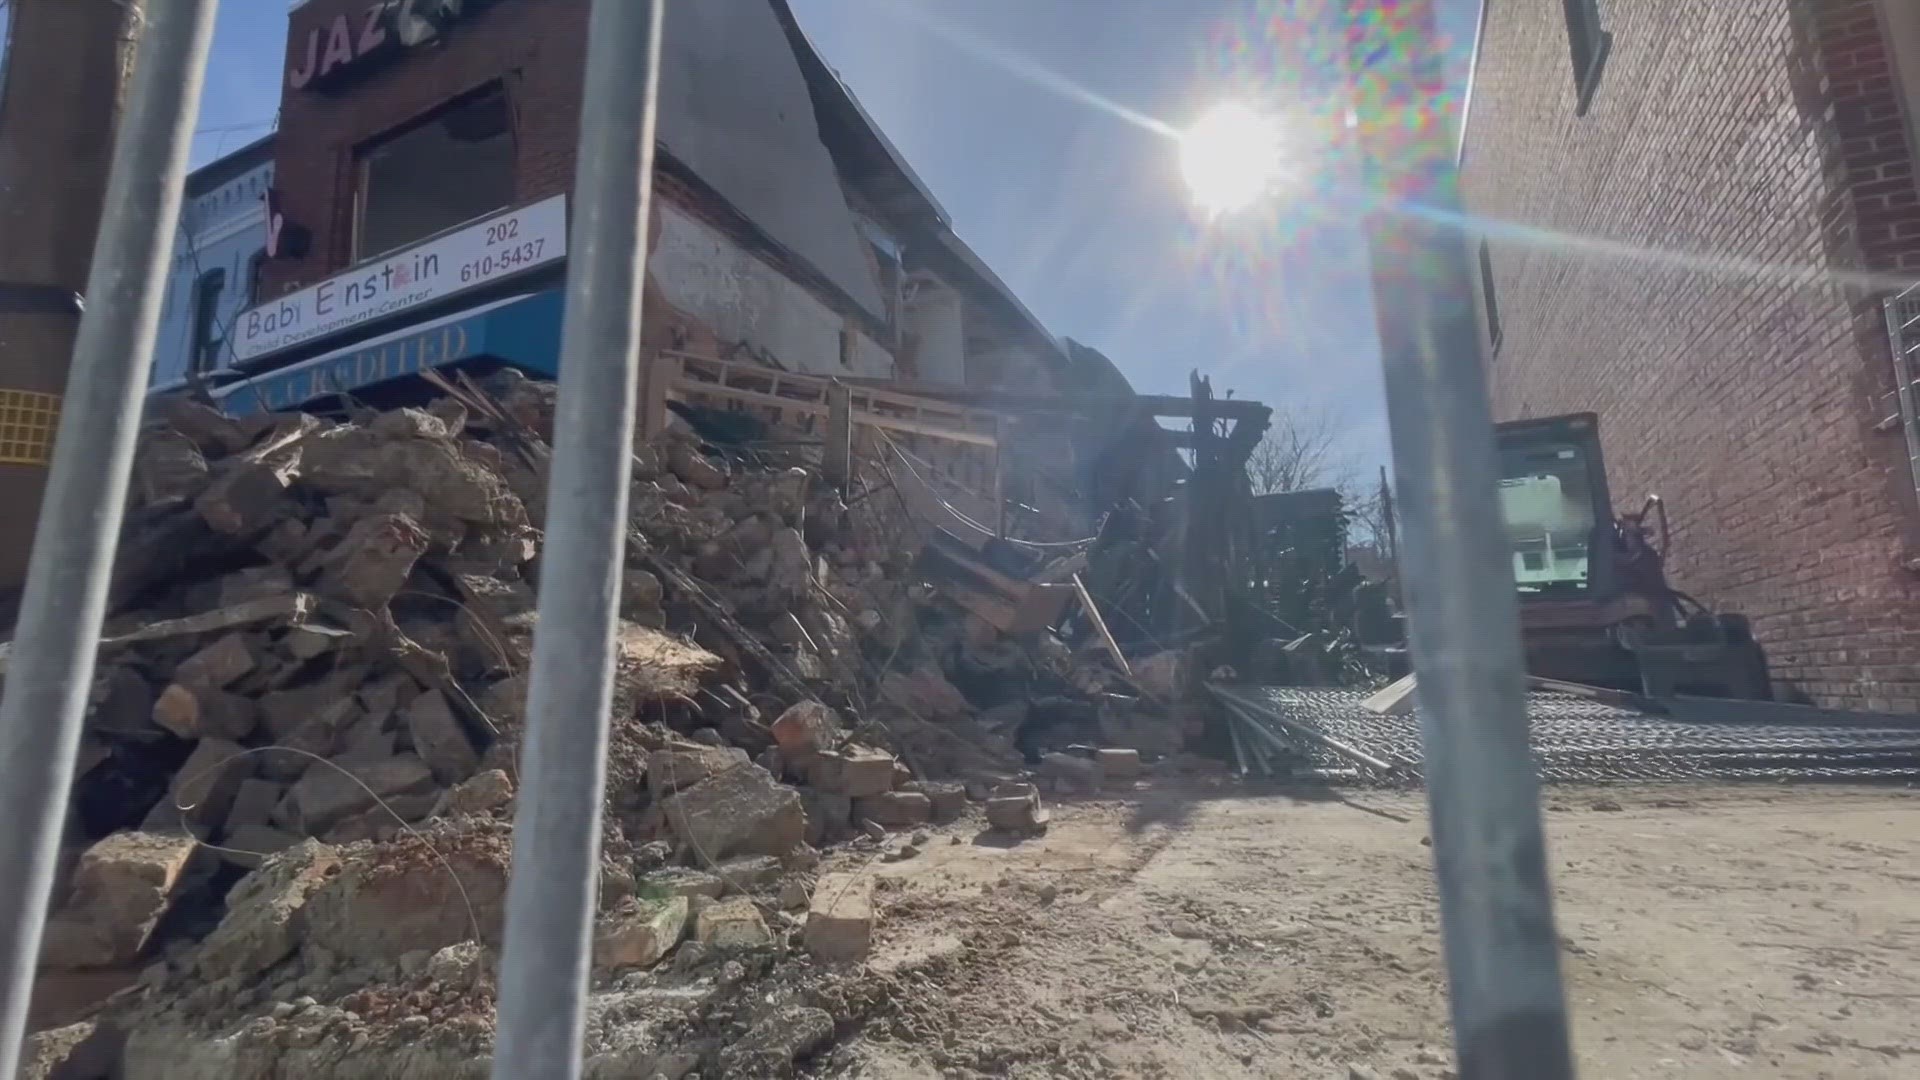 It's been one month since a gas explosion leveled a convenience store and damaged the day care center.